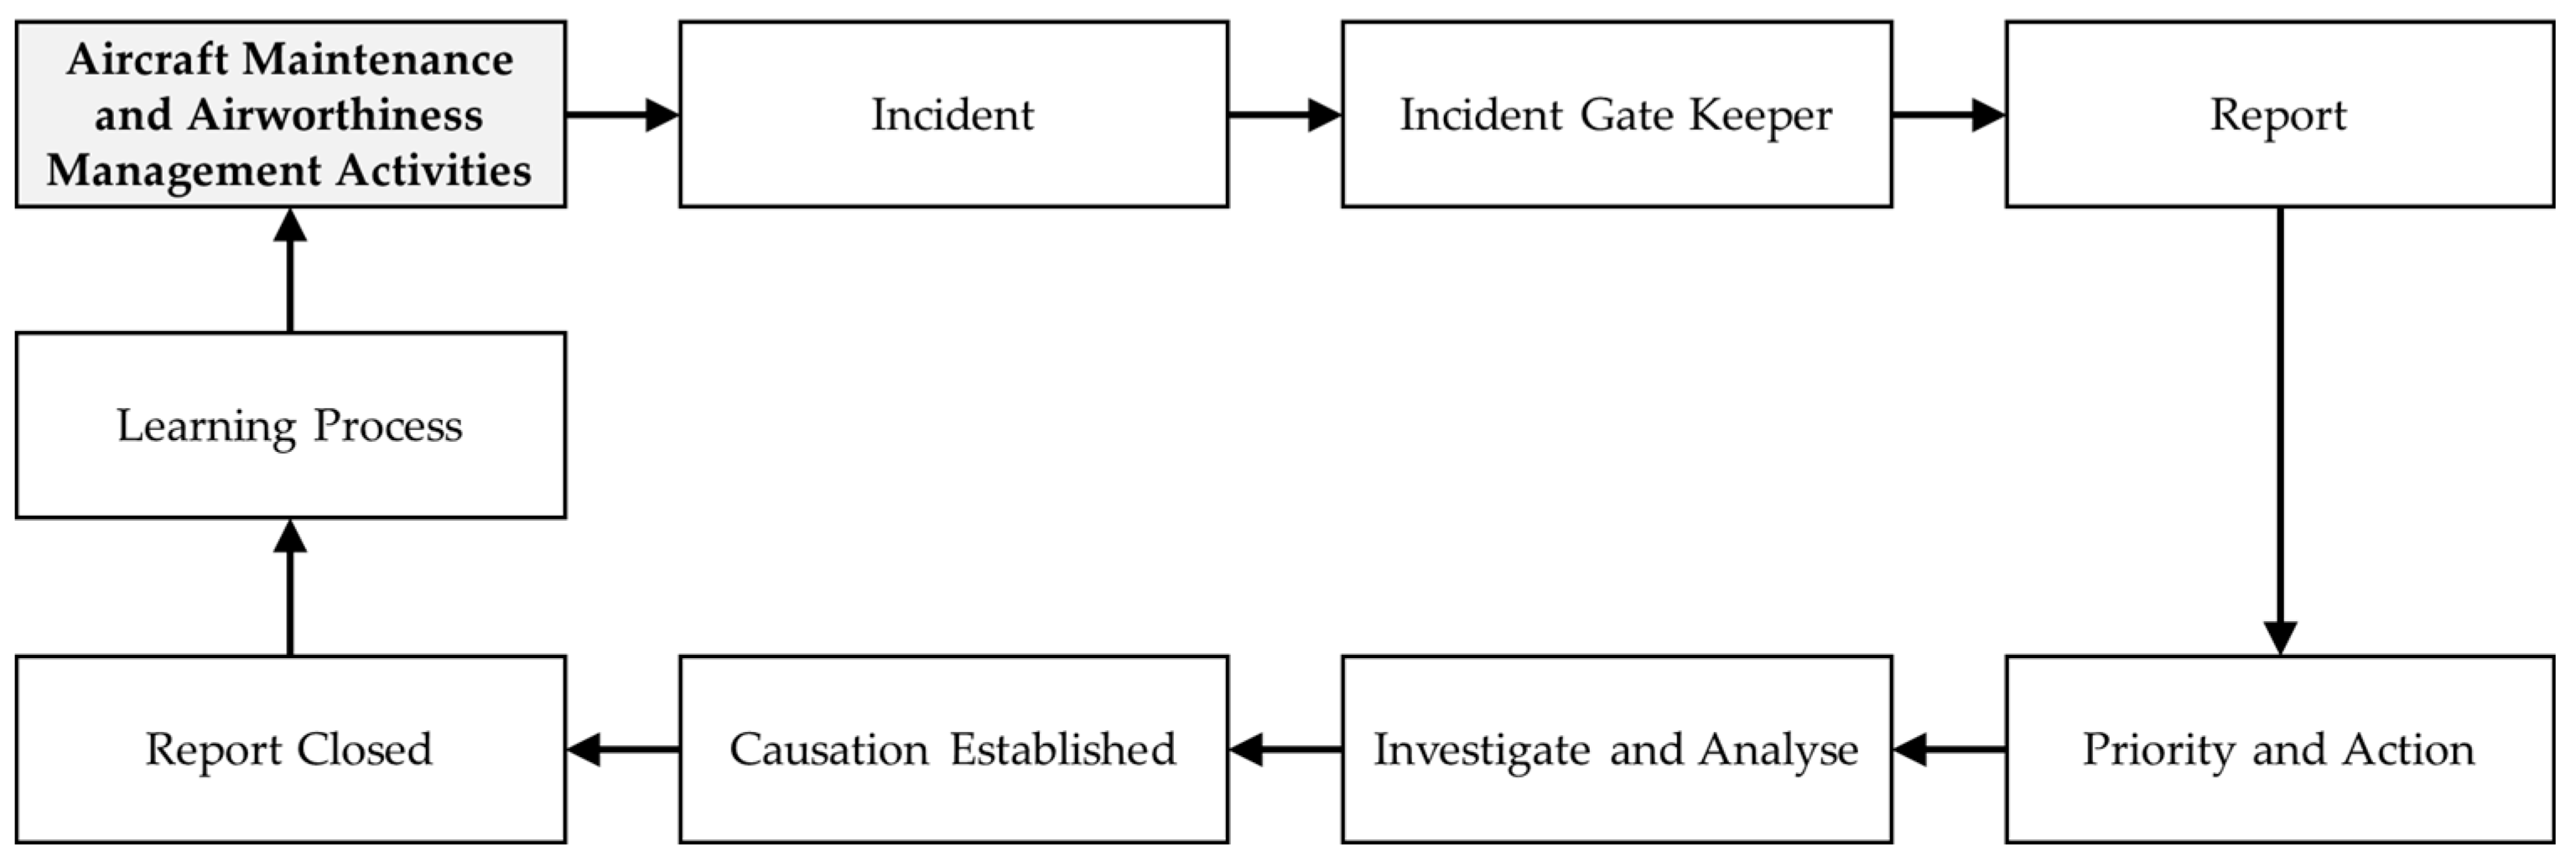 Learning from Incidents